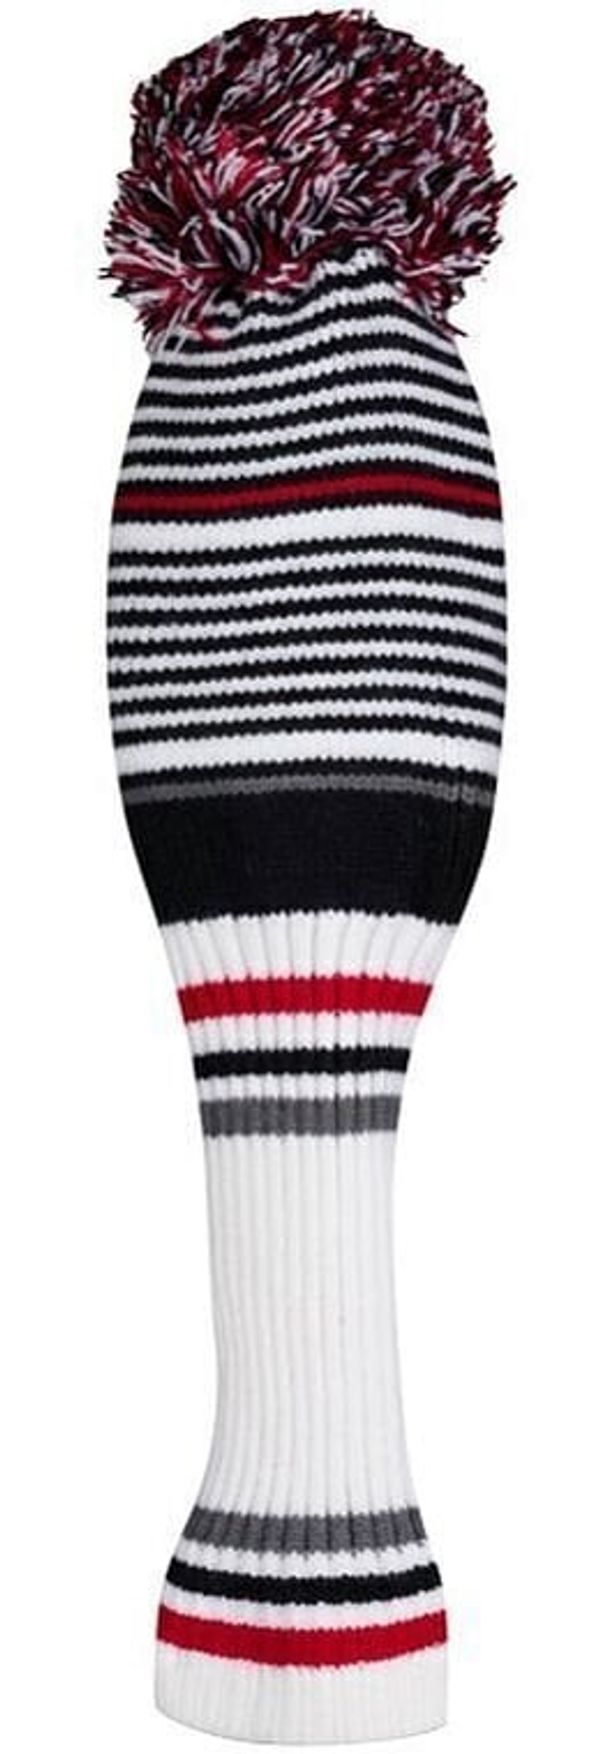 Callaway Callaway Pom Pom Fairway Headcover White/Black/Charcoal/Red